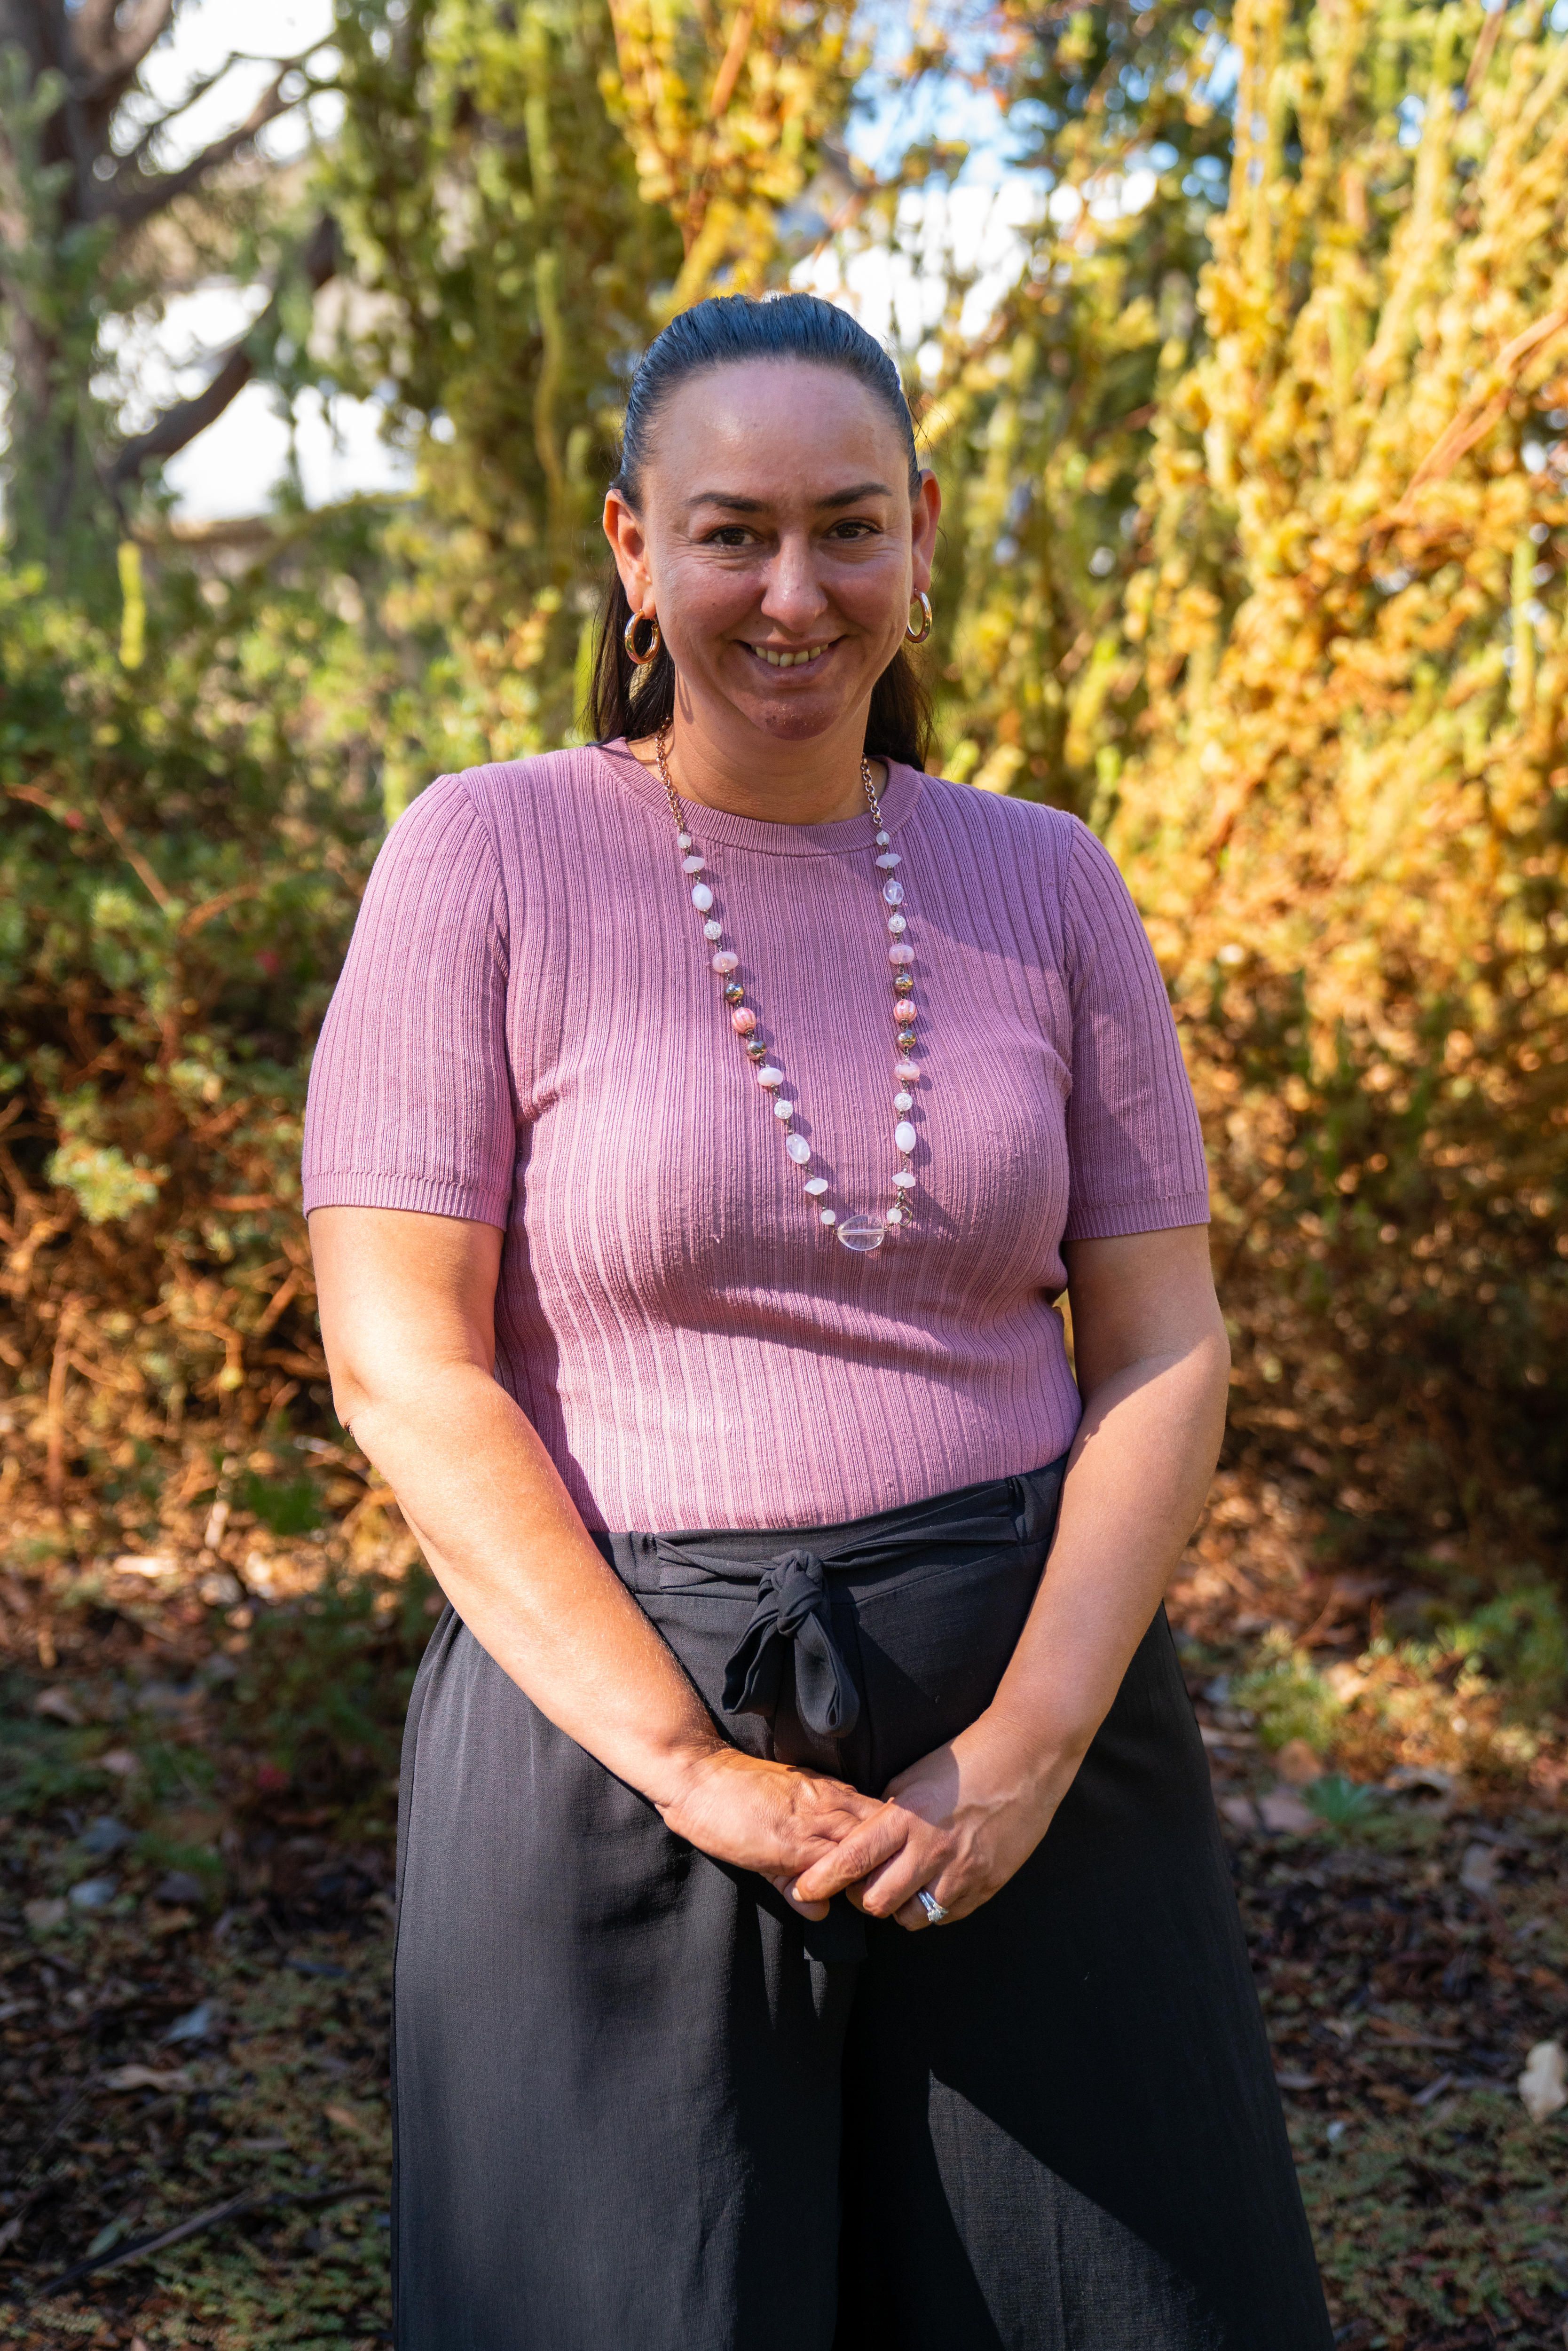 A woman wearing a pink shirt, long white-and-pink necklace and black pants smiles. She's in front of some trees, in a garden.